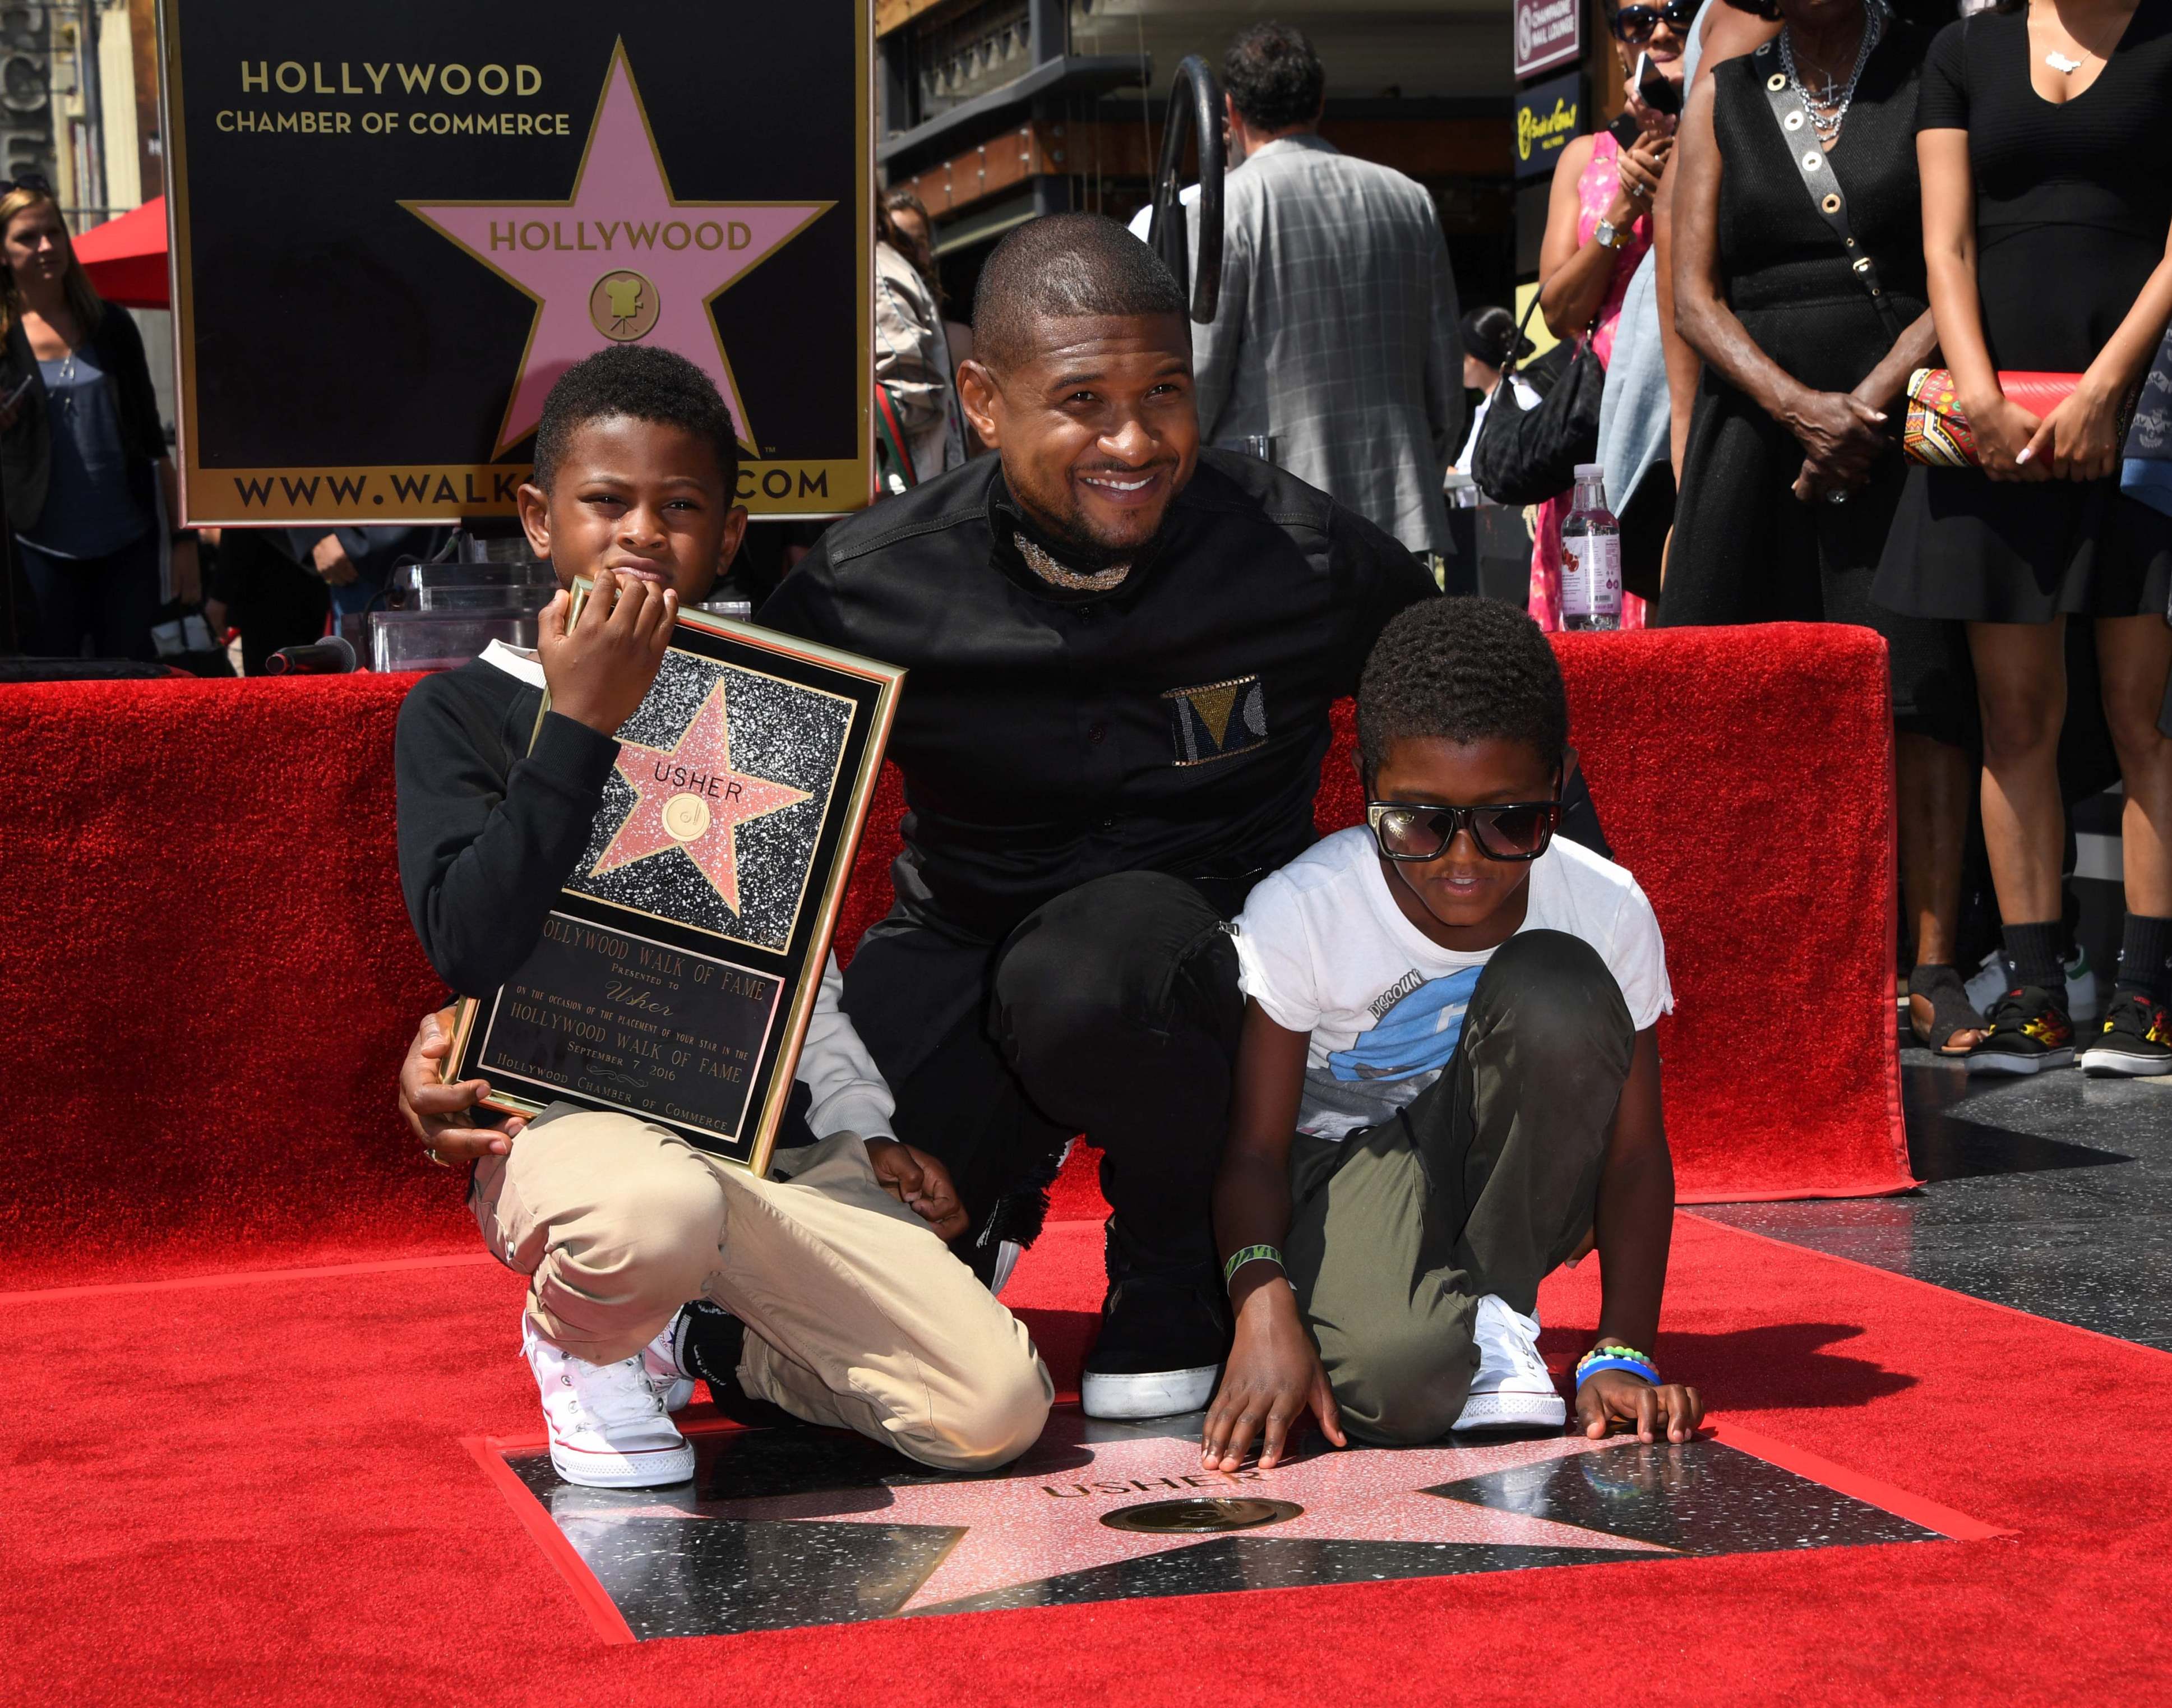 Singer Usher also celebrated with his kids in September 2016.